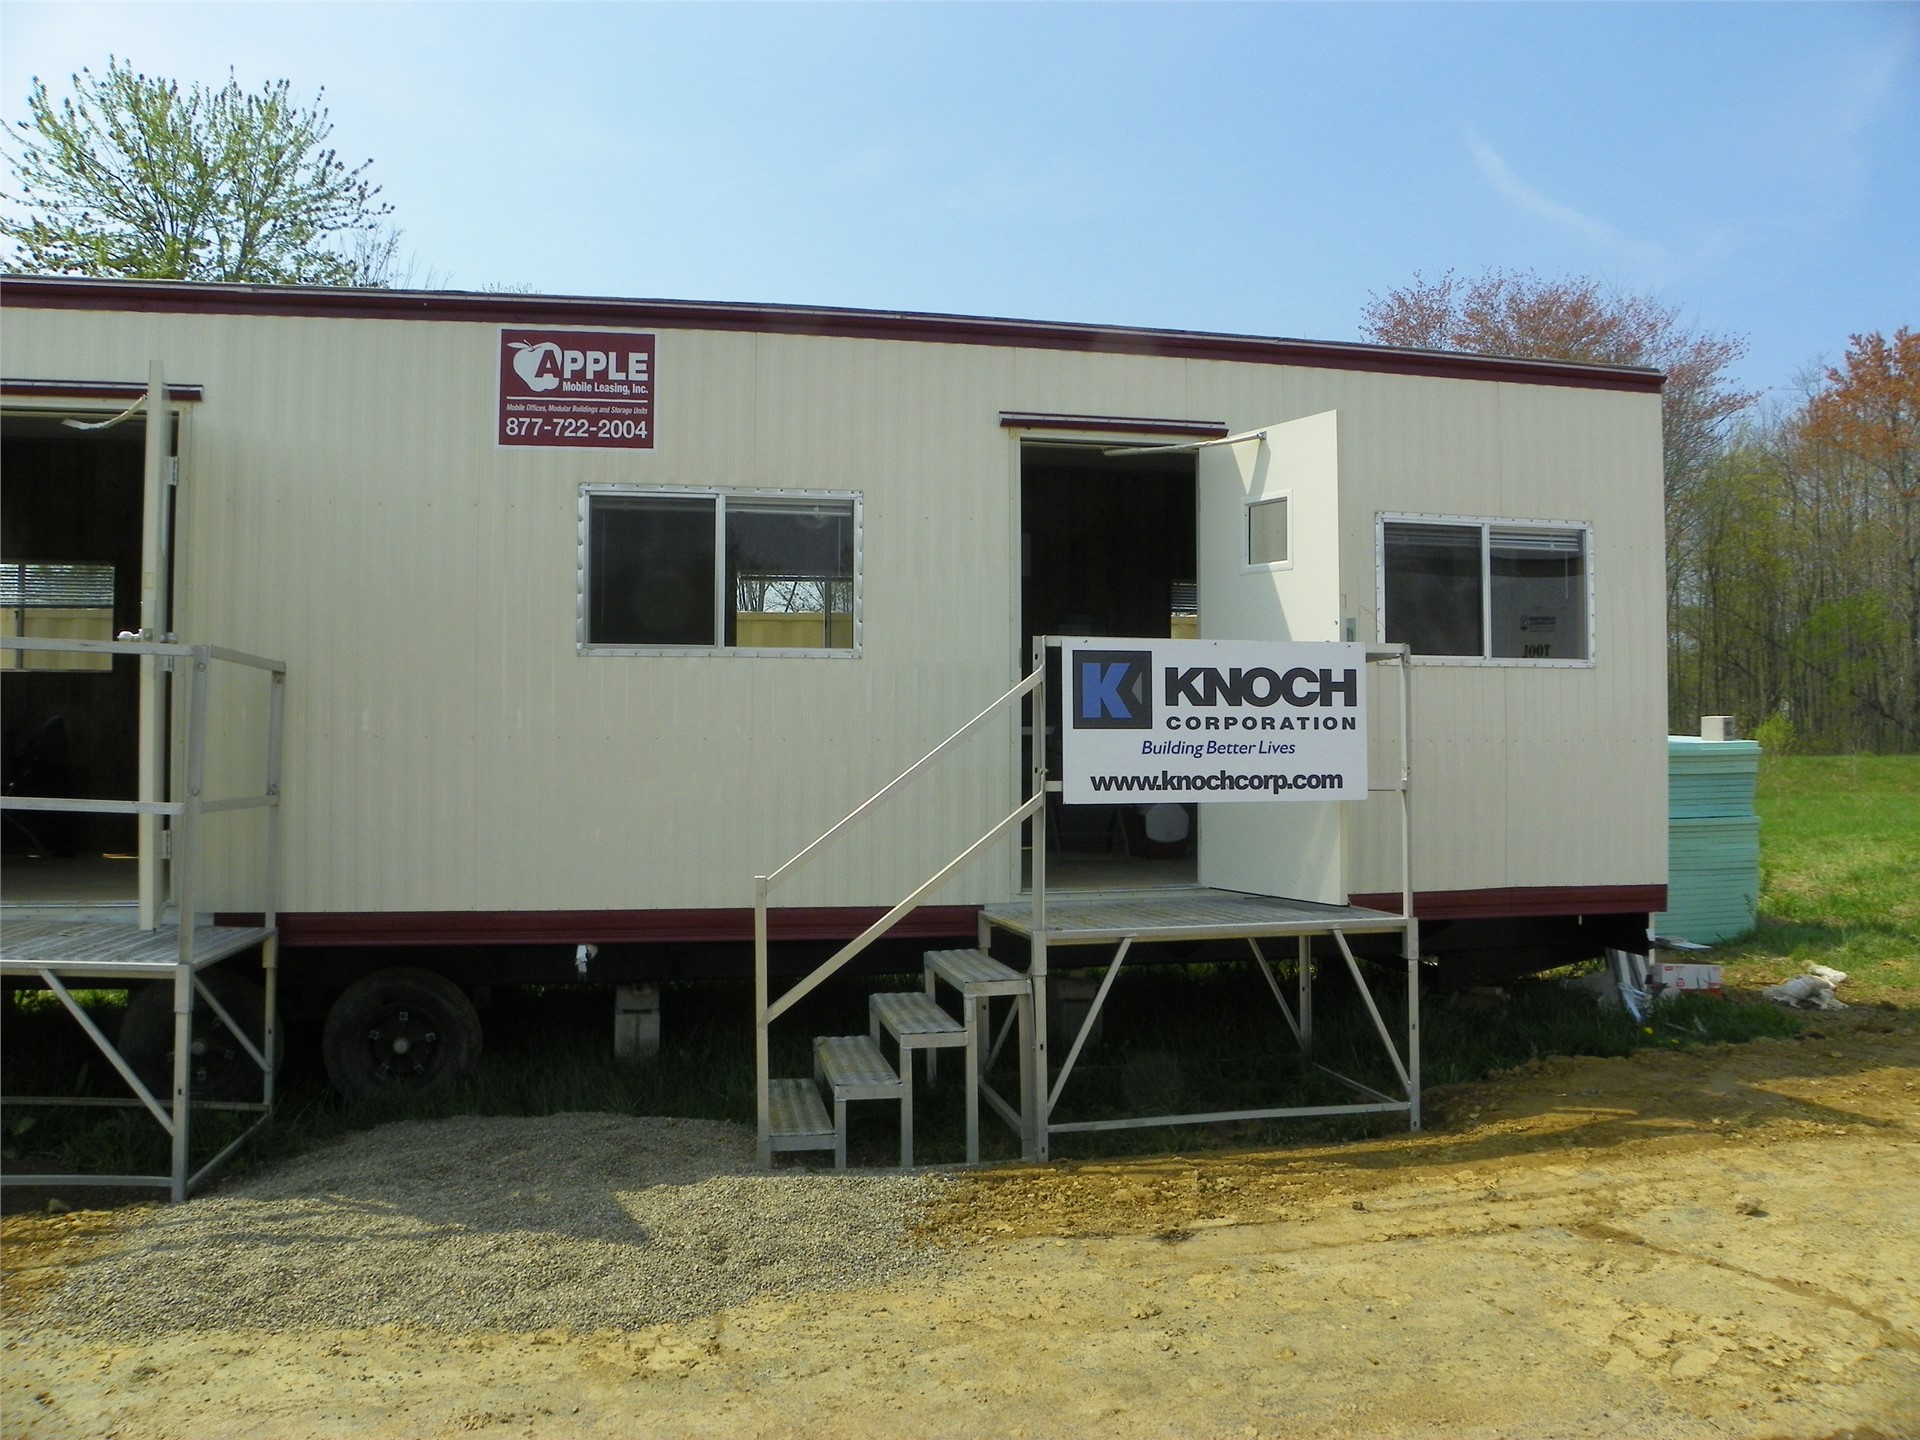 Knoch Corporation Trailer—contractors for the stadium project